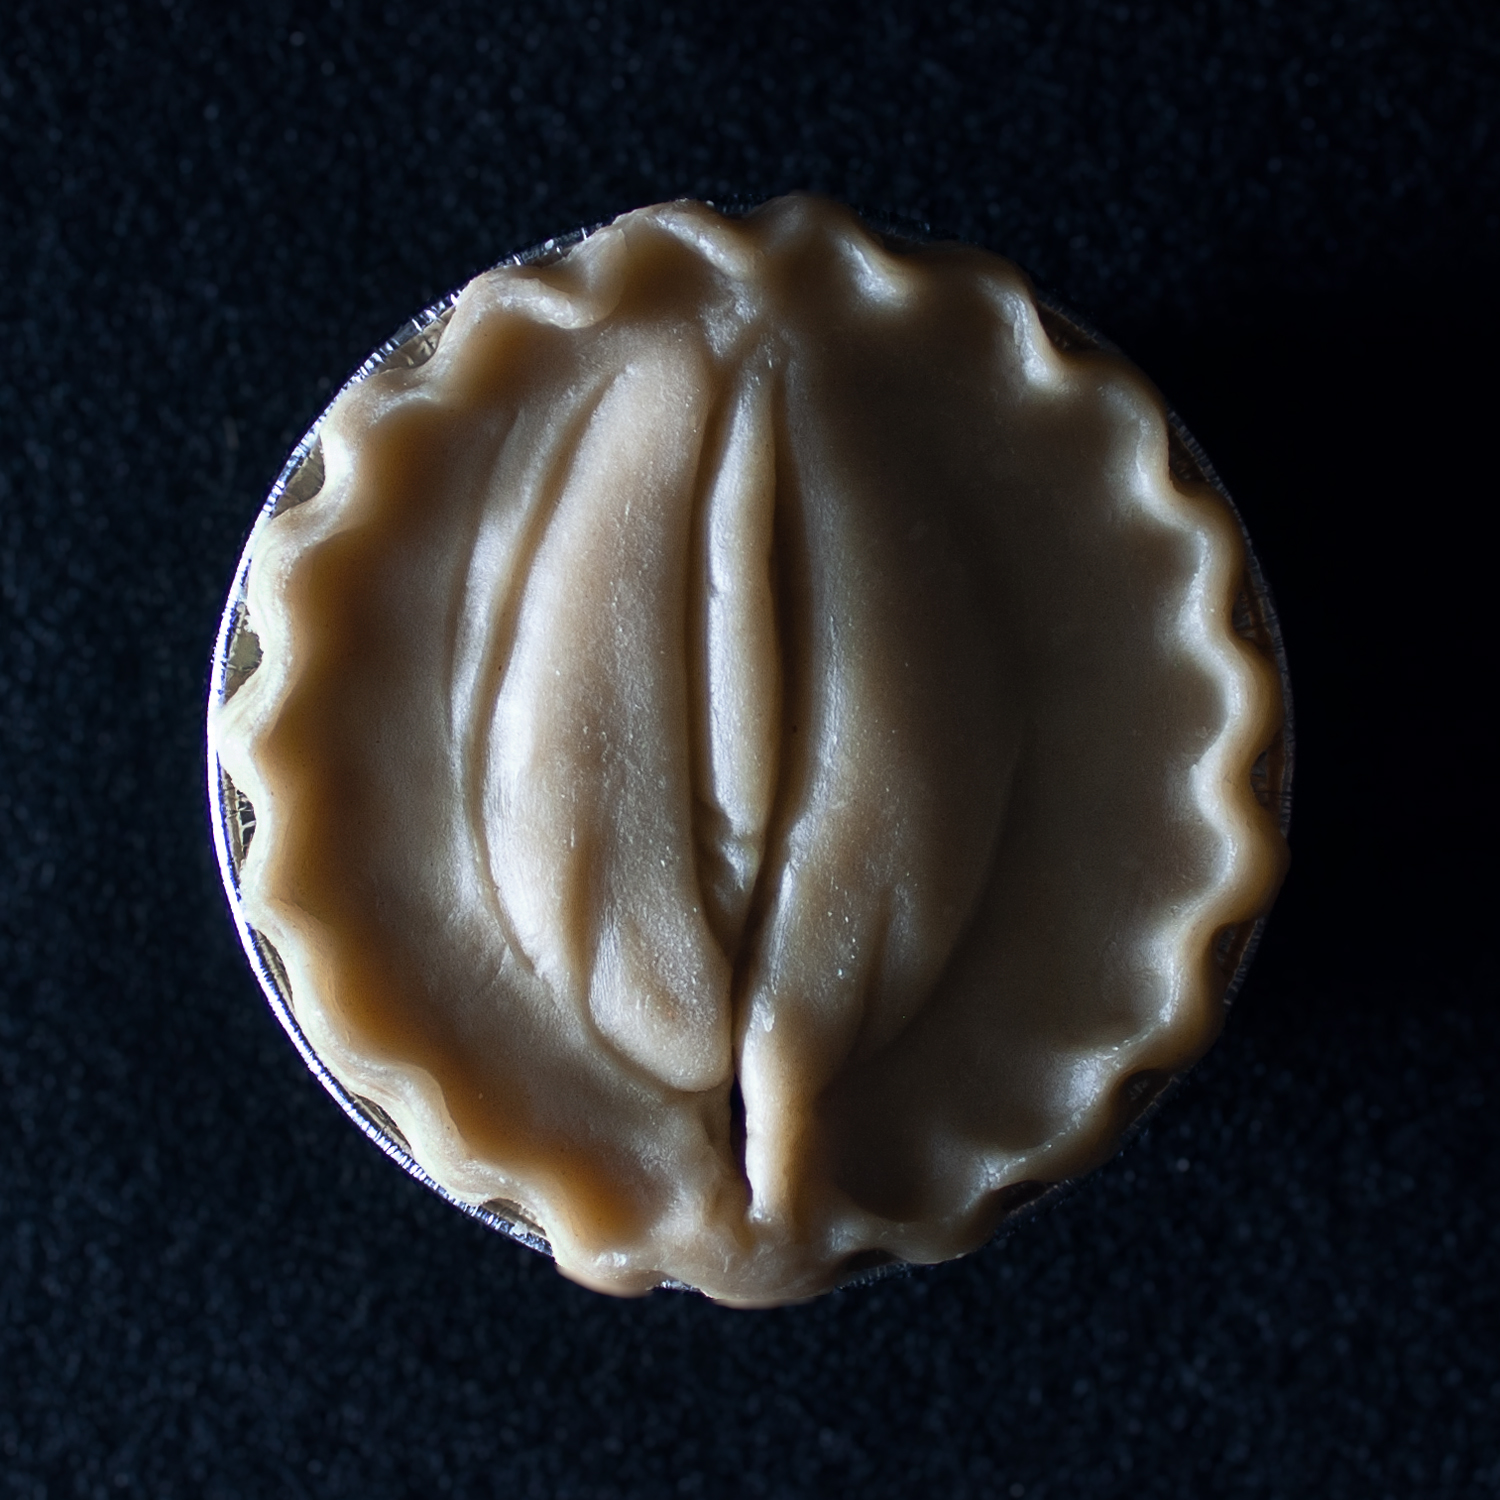 Pie 4, a pie sculpted to appear like a vulva